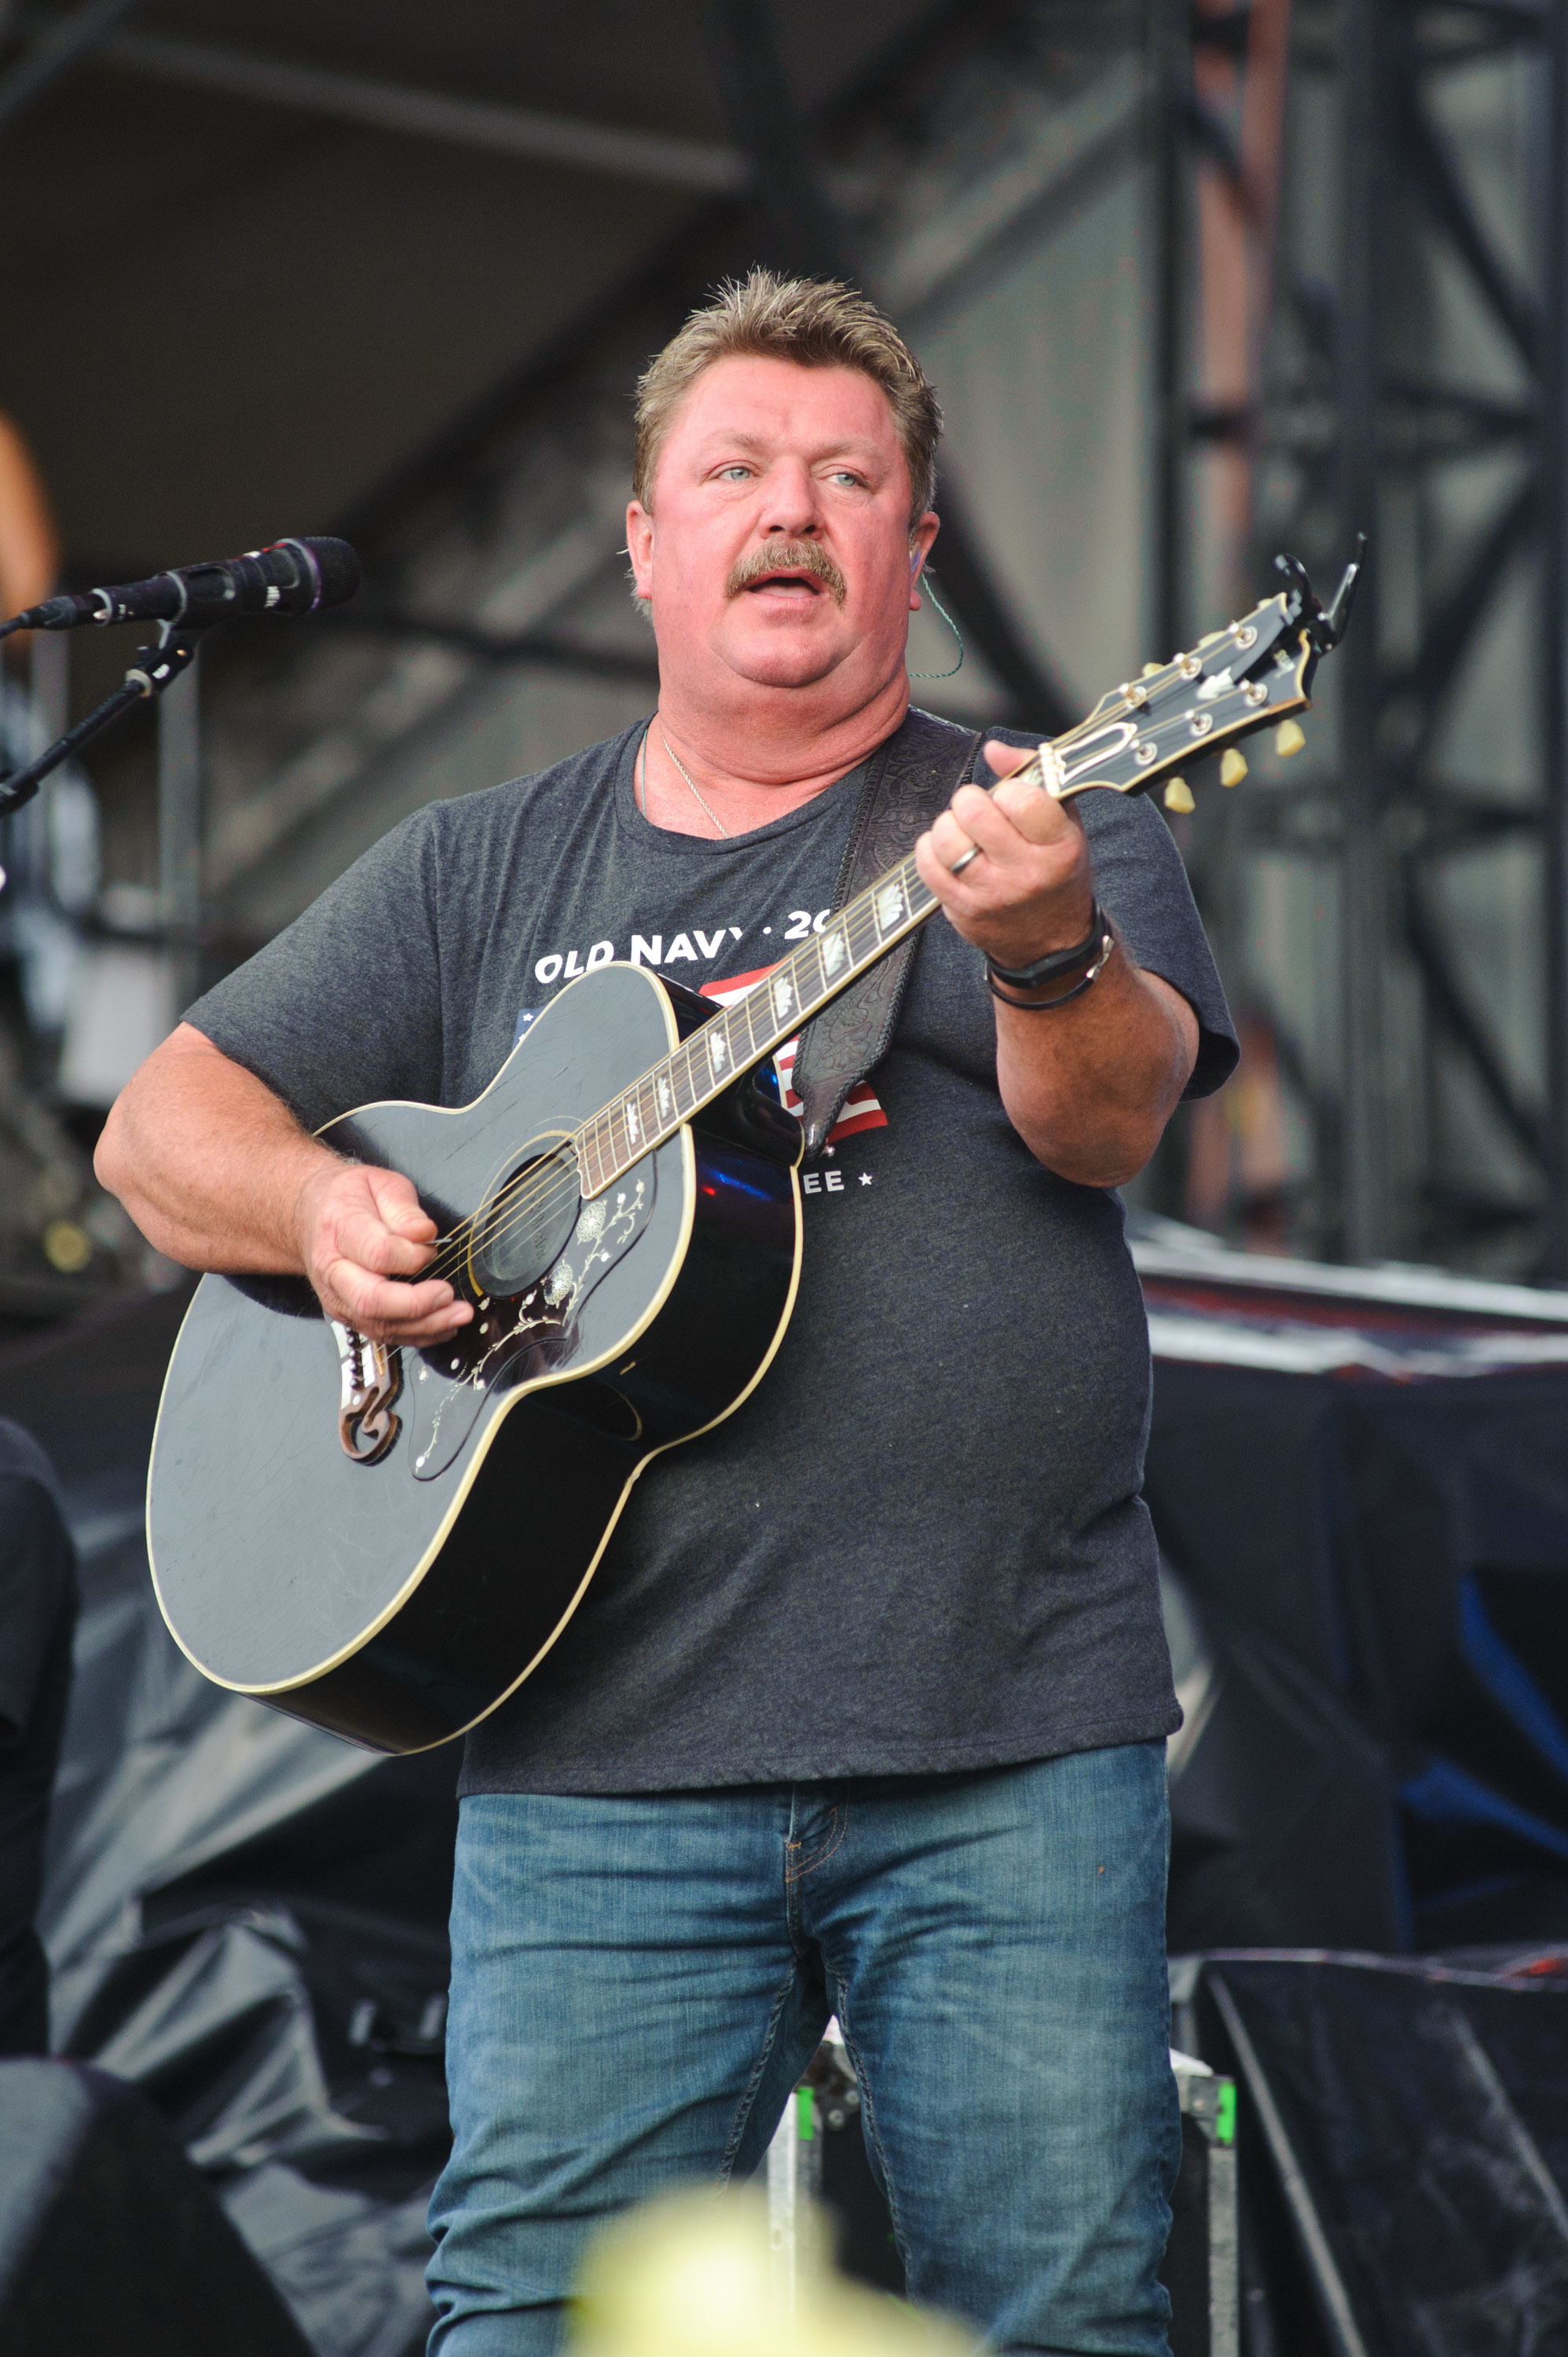 <p>Country singer Joe Diffie died on March 29 from complications caused by the coronavirus. He was 61. His hit songs include "Home," "If the Devil Danced (In Empty Pockets)" and "Bigger Than the Beatles." At the 1993 Grammy Awards, Joe -- a member of the Grand Ole Opry for 25 years -- was nominated for best country collaboration with vocals for the song "Not Too Much to Ask" with Mary Chapin Carpenter.</p>